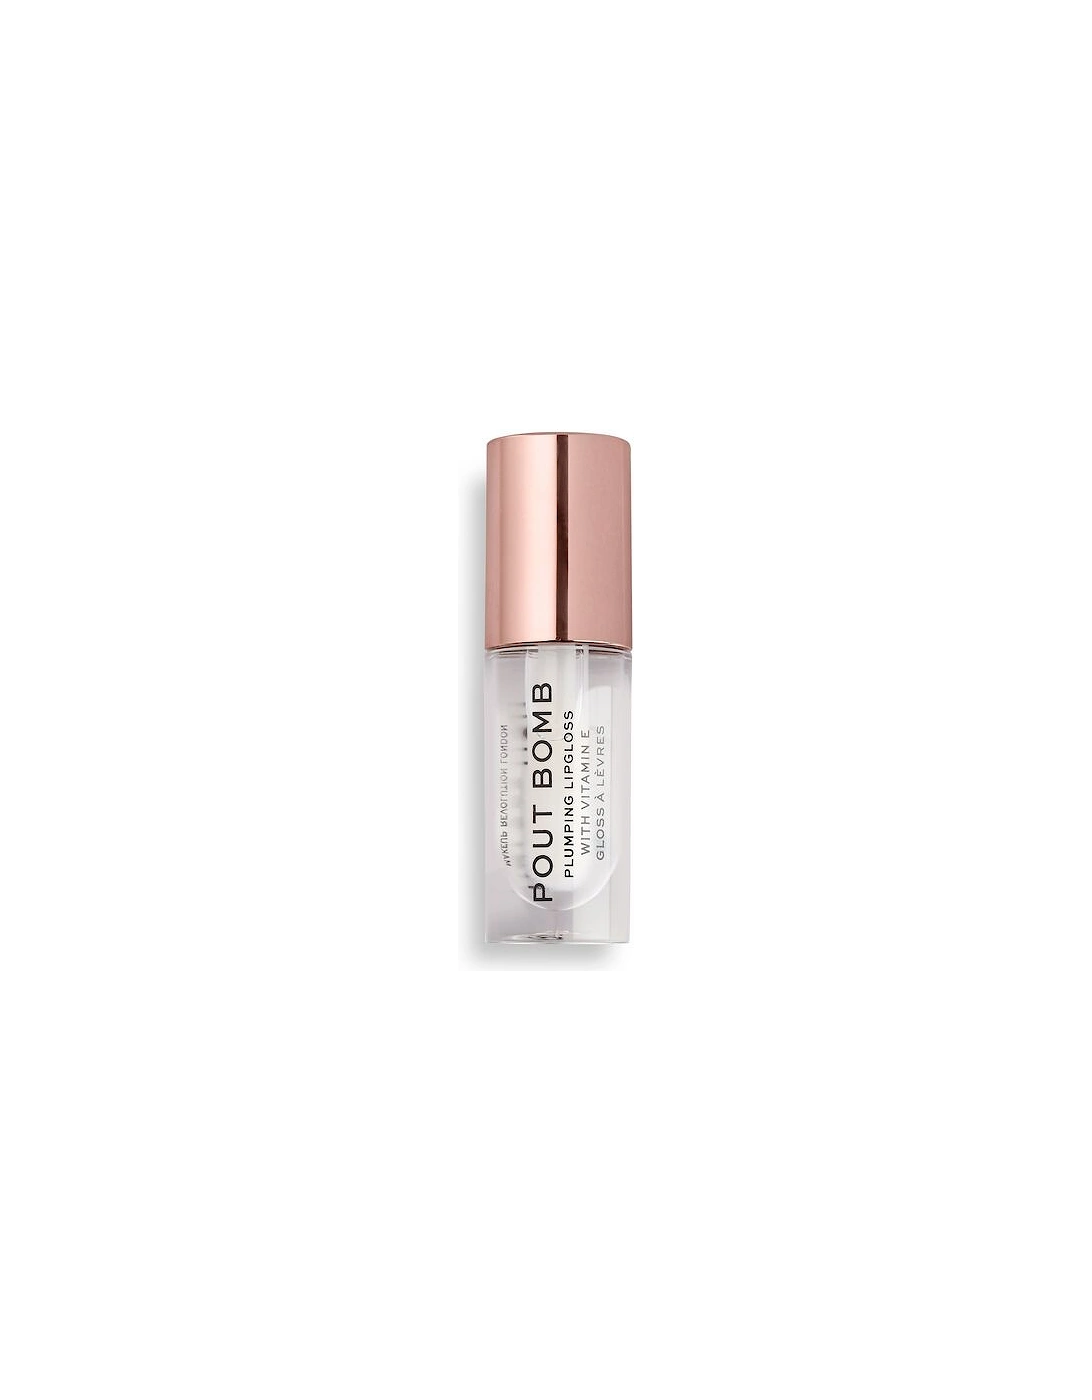 Pout Bomb Plumping Gloss Glaze Clear, 2 of 1